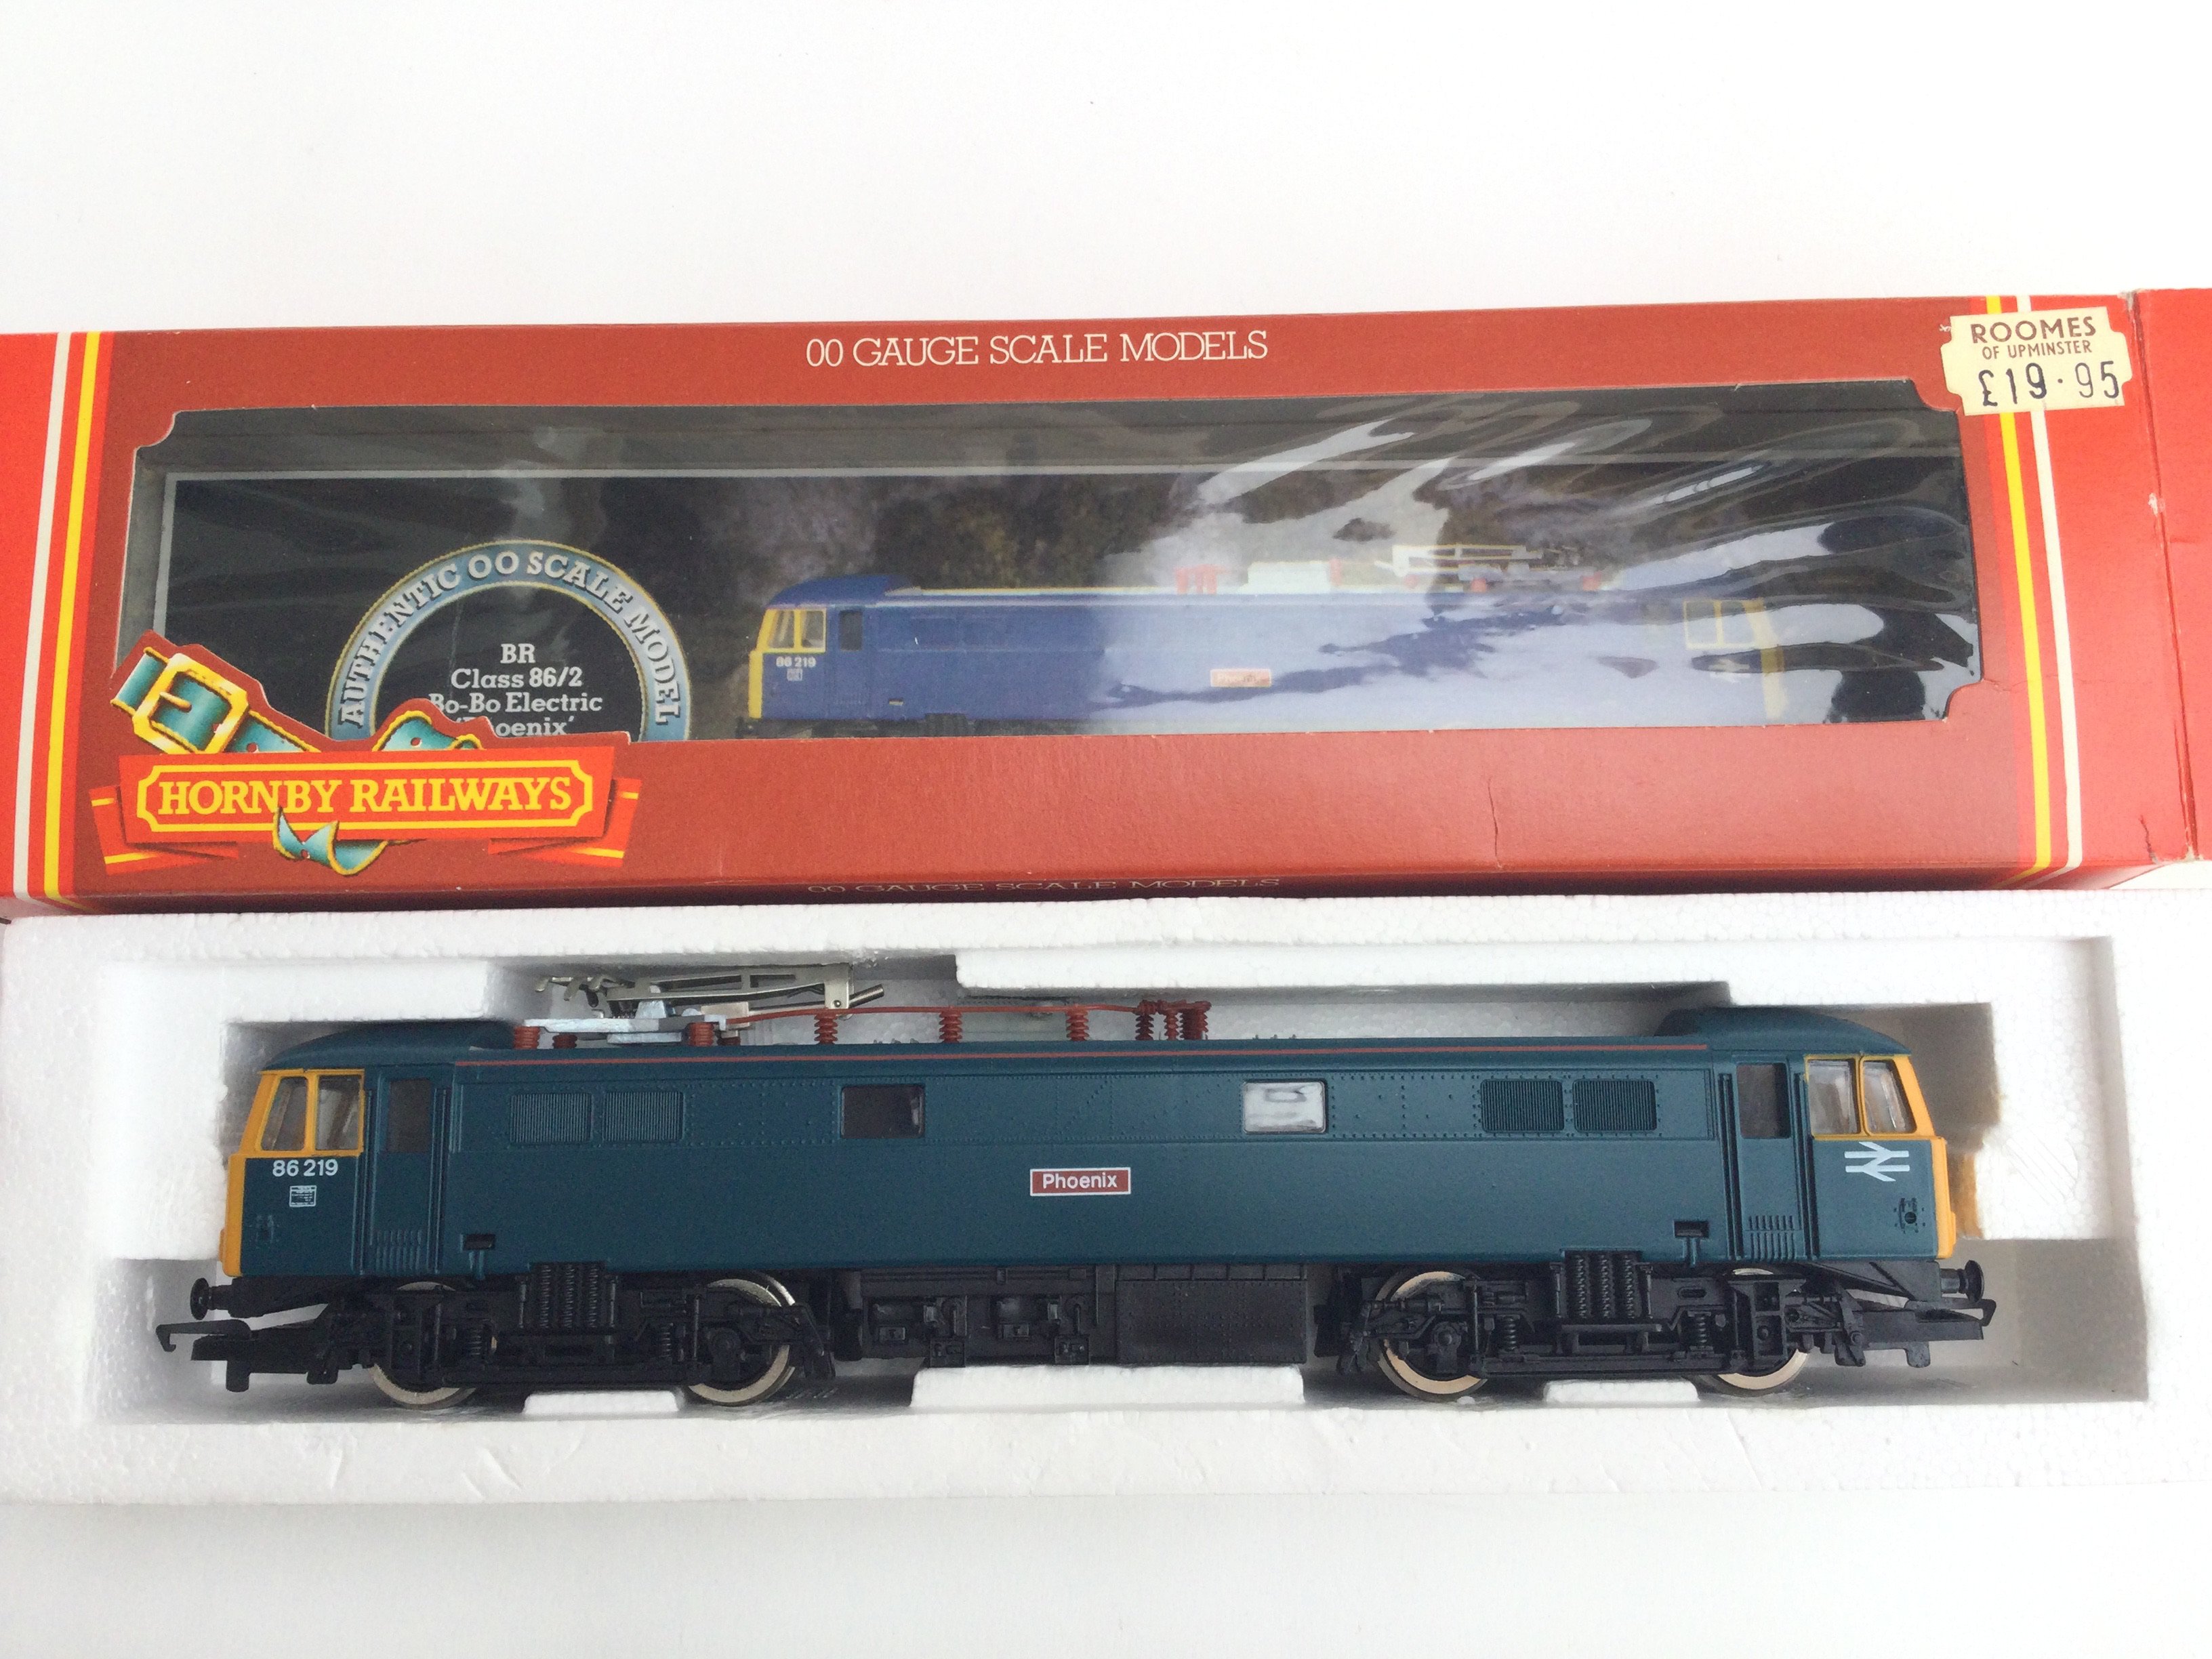 A Boxed Hornby 00 Gauge BR Class 86/2 Electric Pho